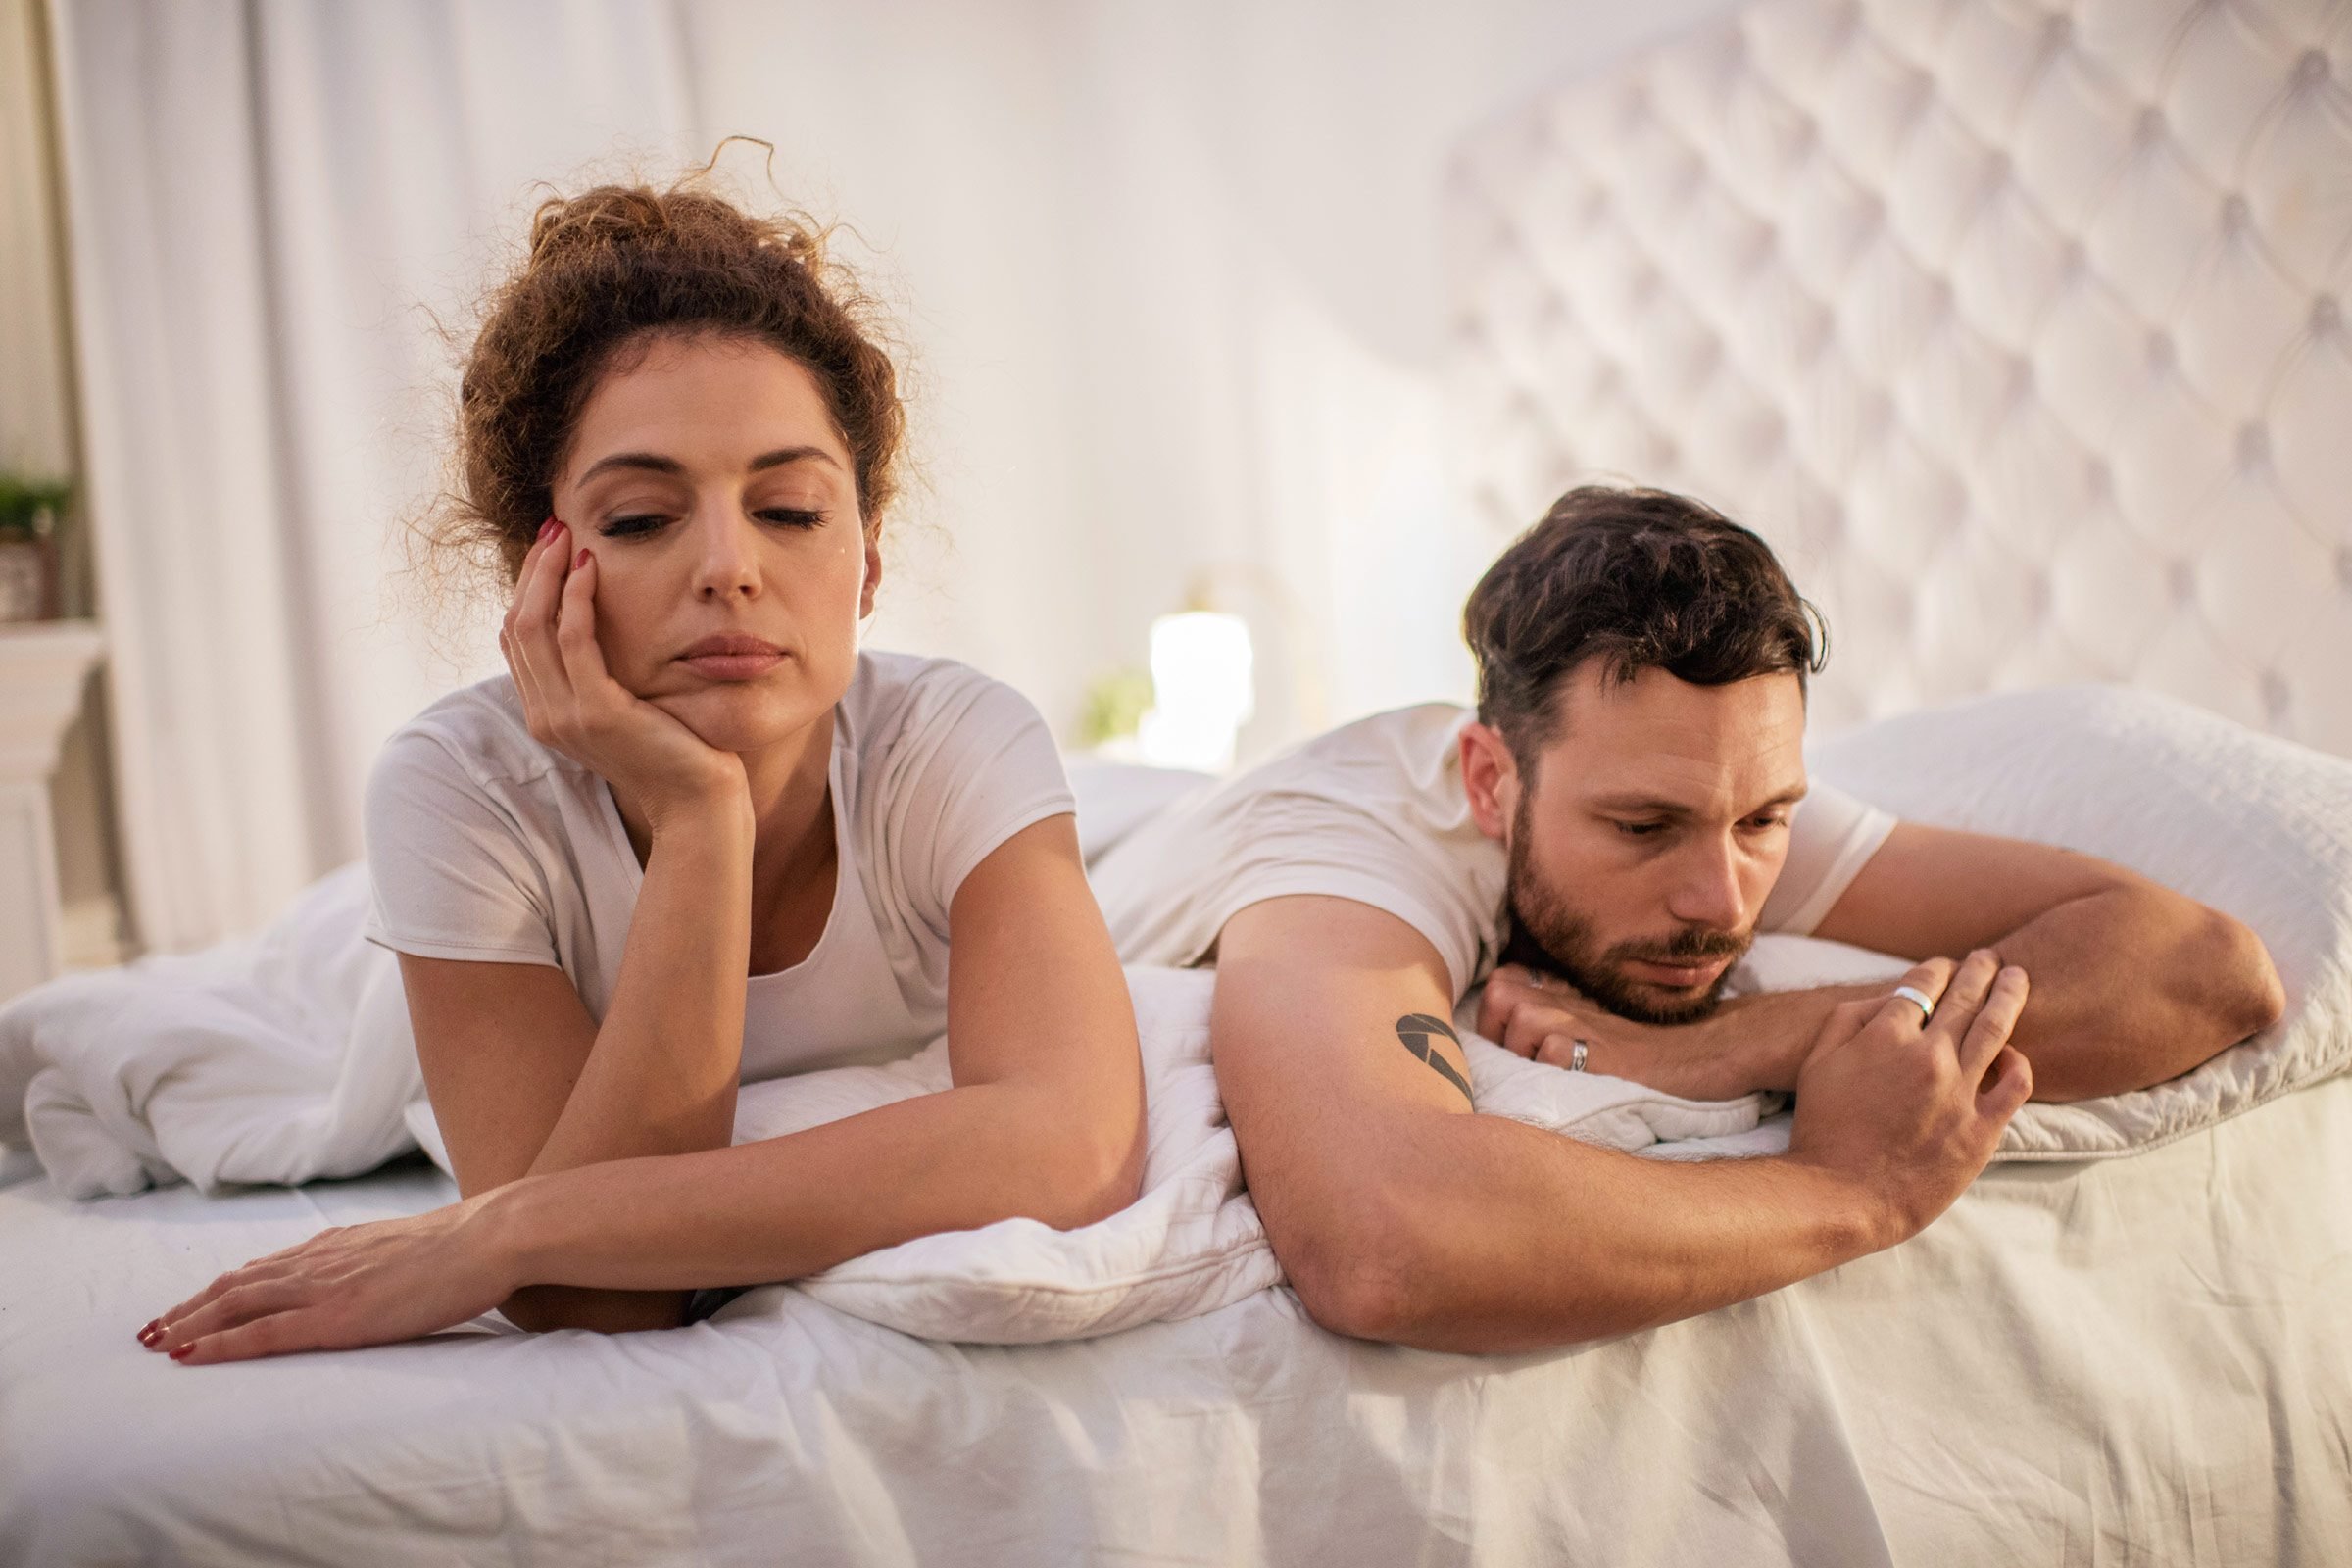 Falling Out Of Love Has Your Spouse Lost Interest